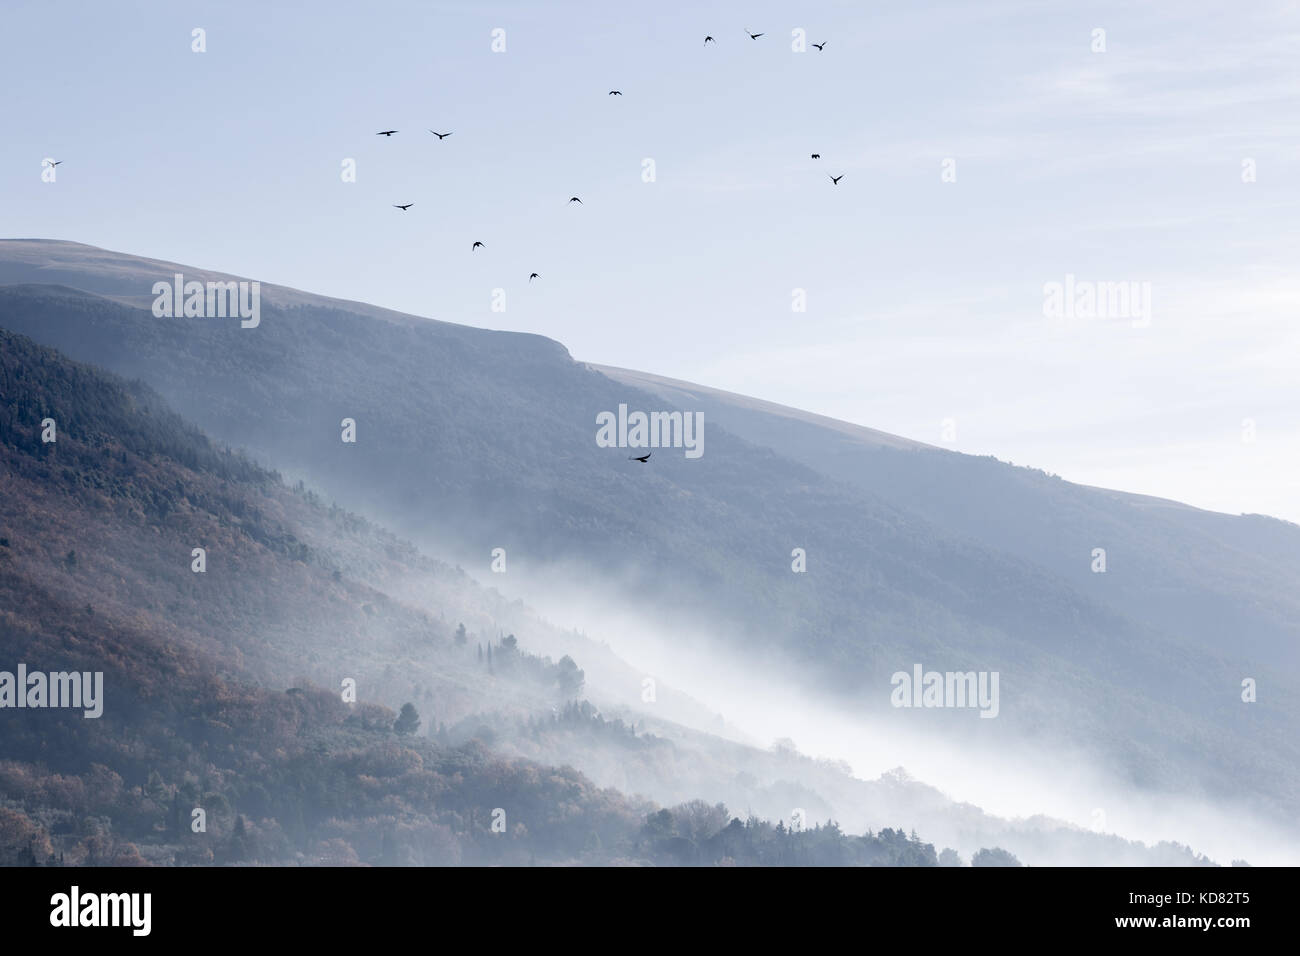 A flock of birds flying over mountains and hills covered by mist Stock Photo